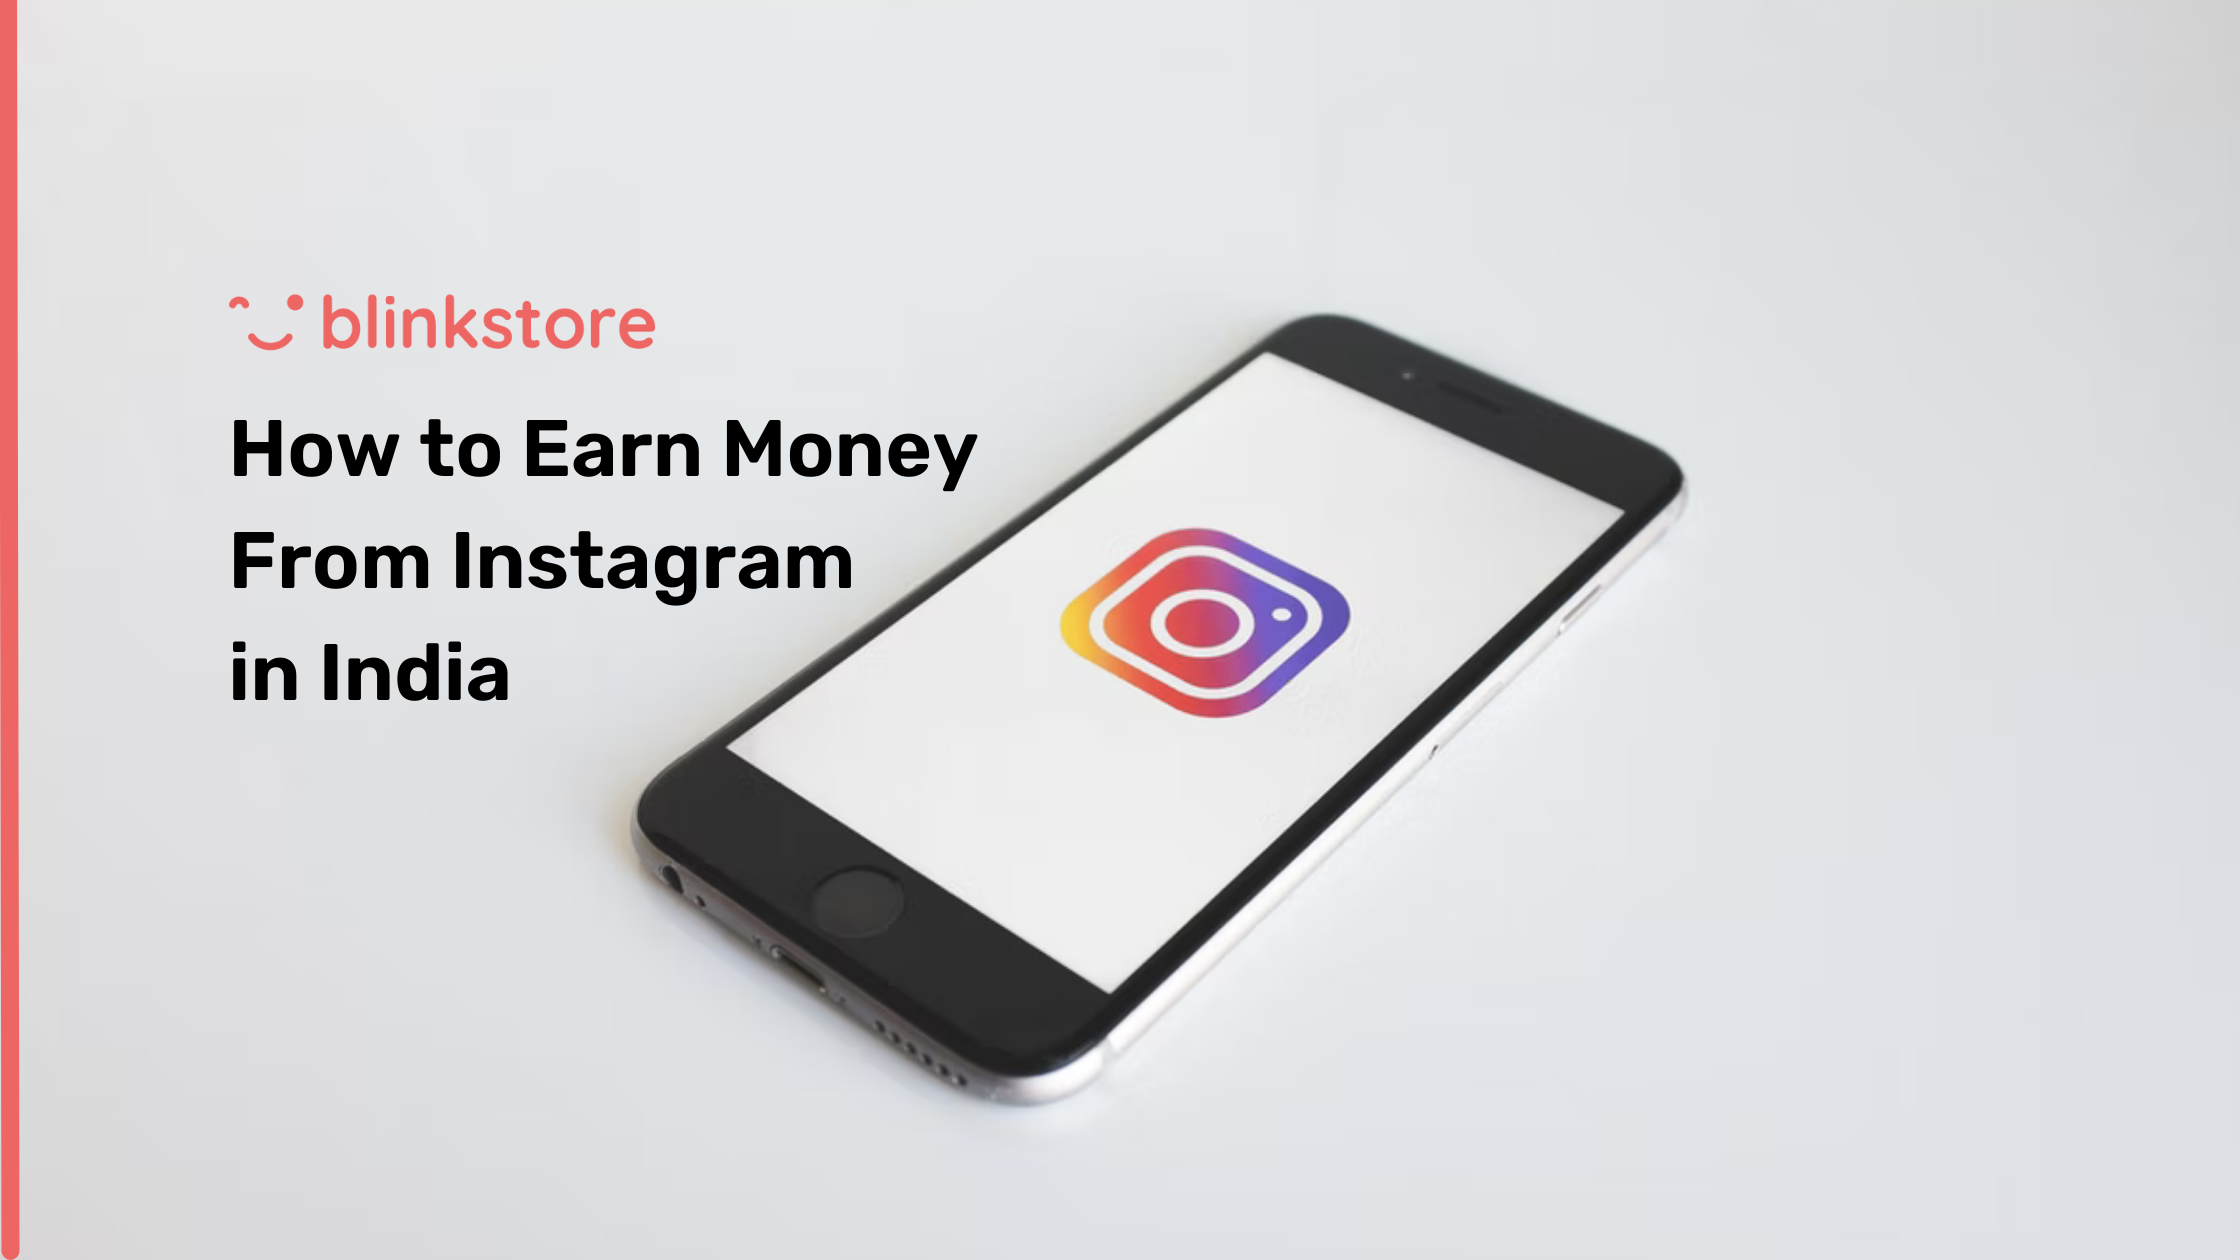 15 Amazing Ideas On How To Earn Money From Instagram in India